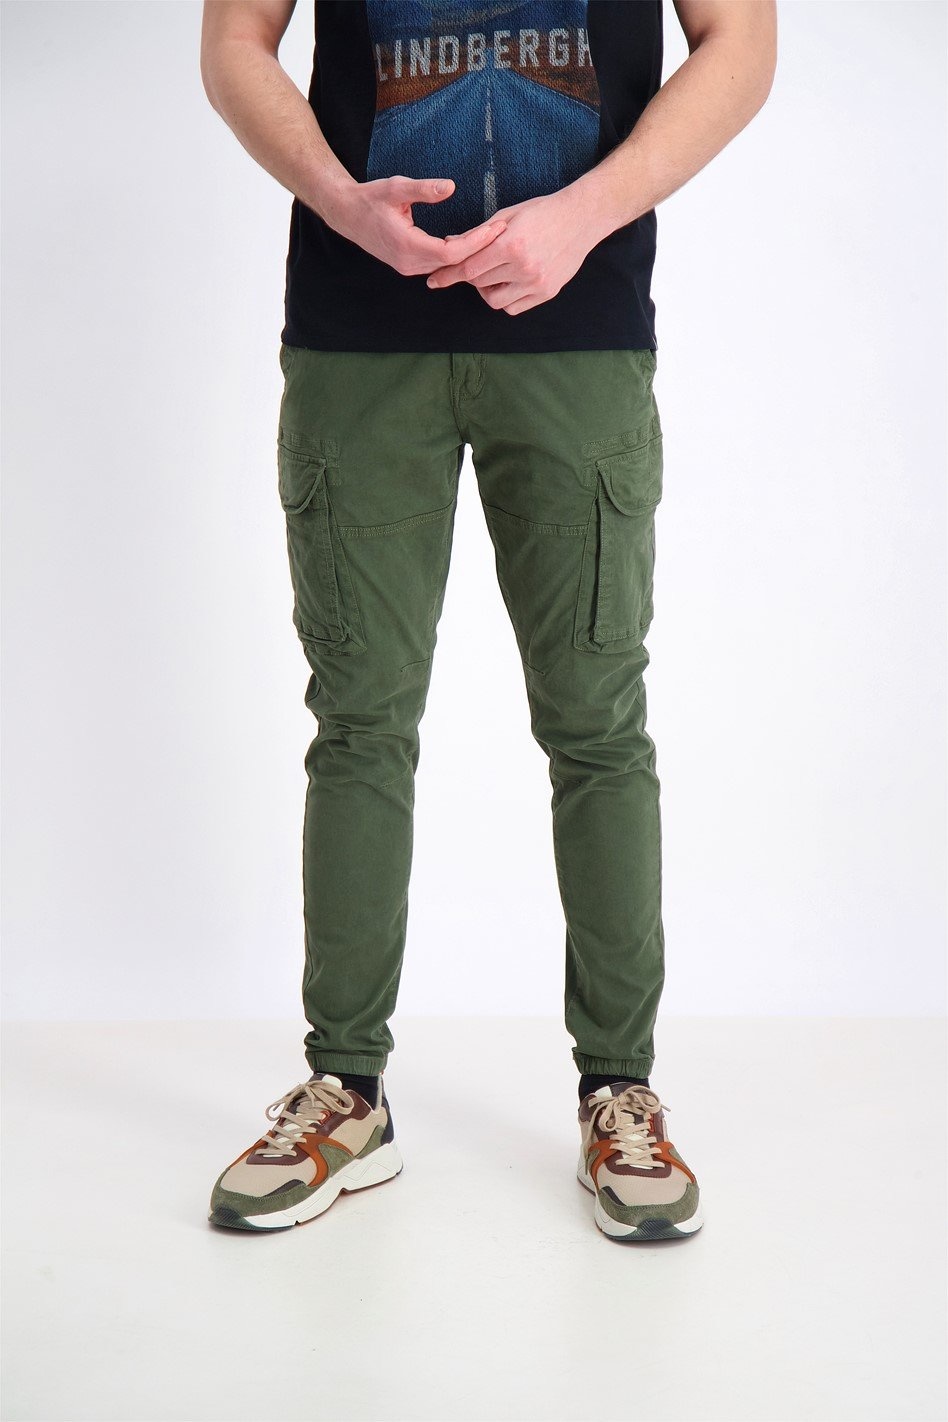 Buy jean cargo homme - OFF-60% > Free Delivery